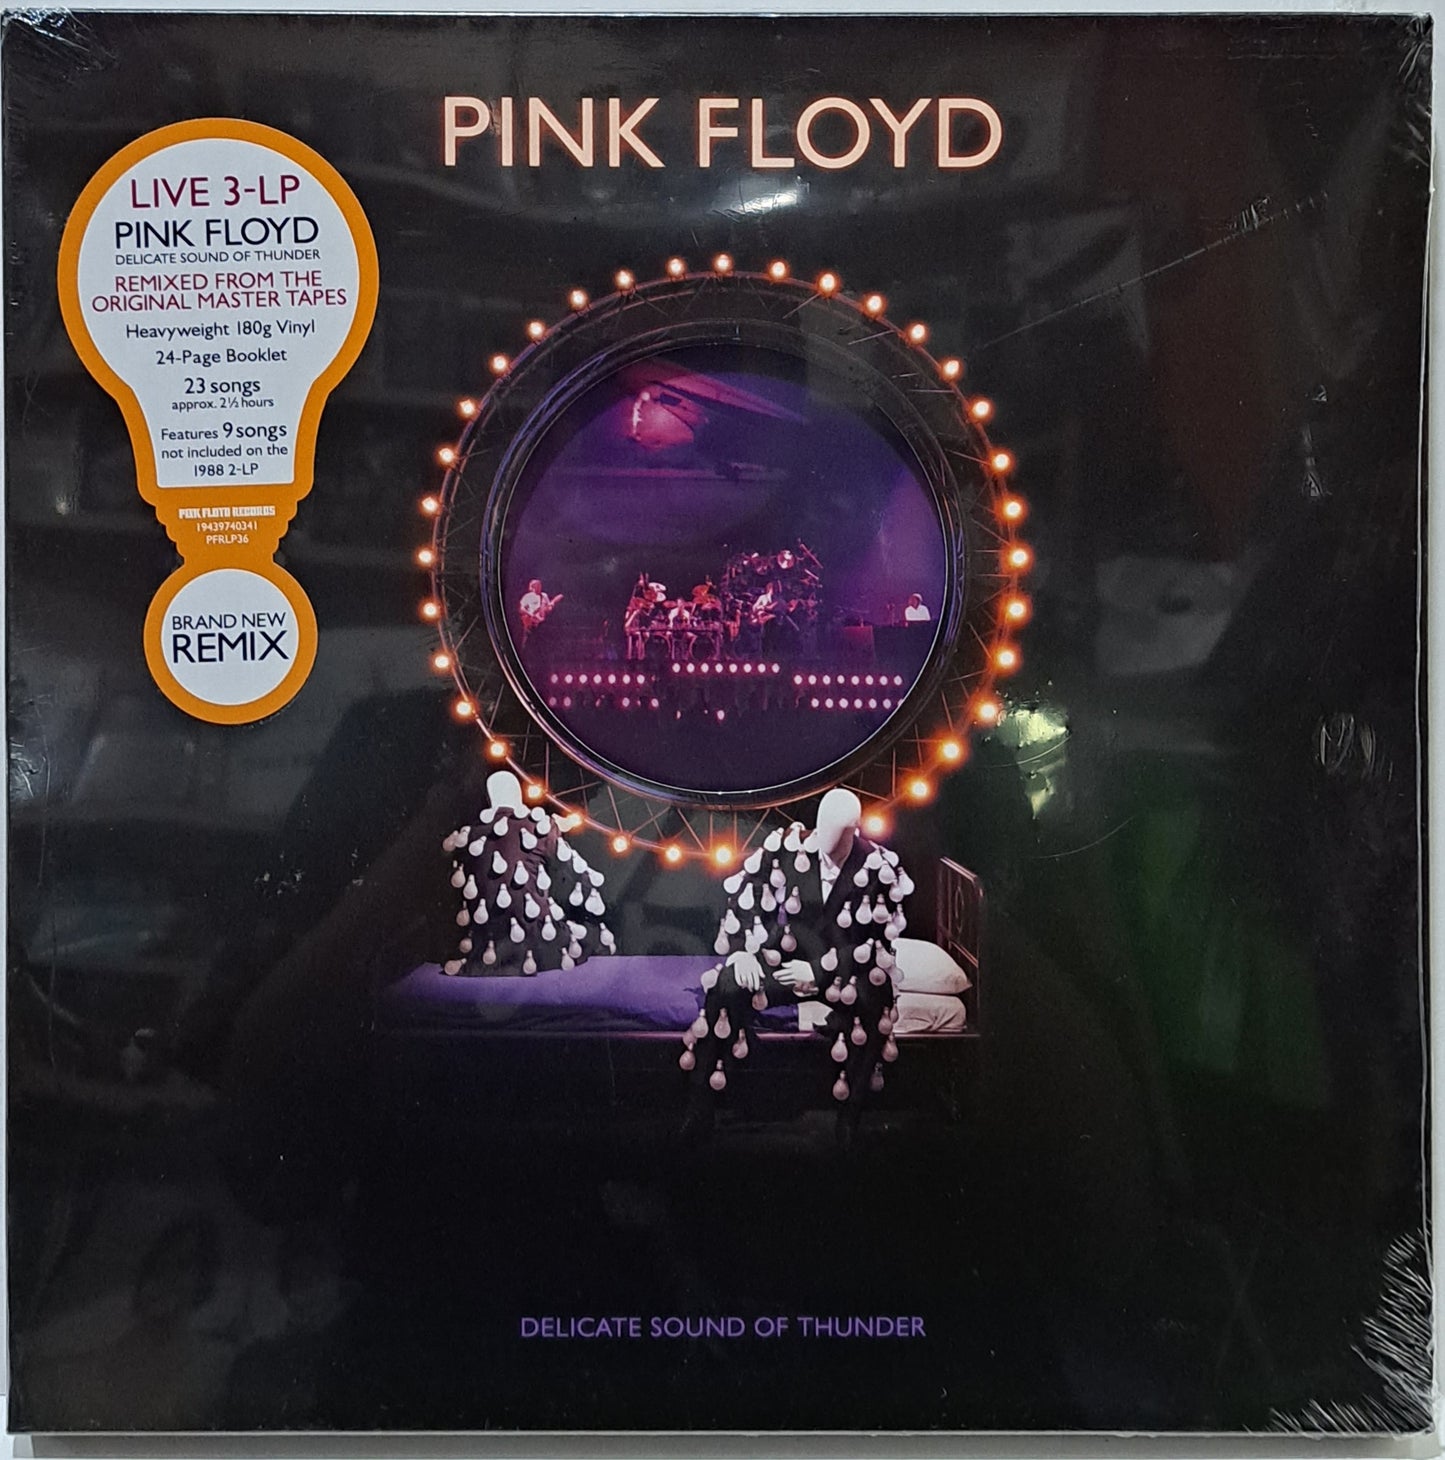 PINK FLOYD - DELICATE SOUND OF THUNDER  3 LPS